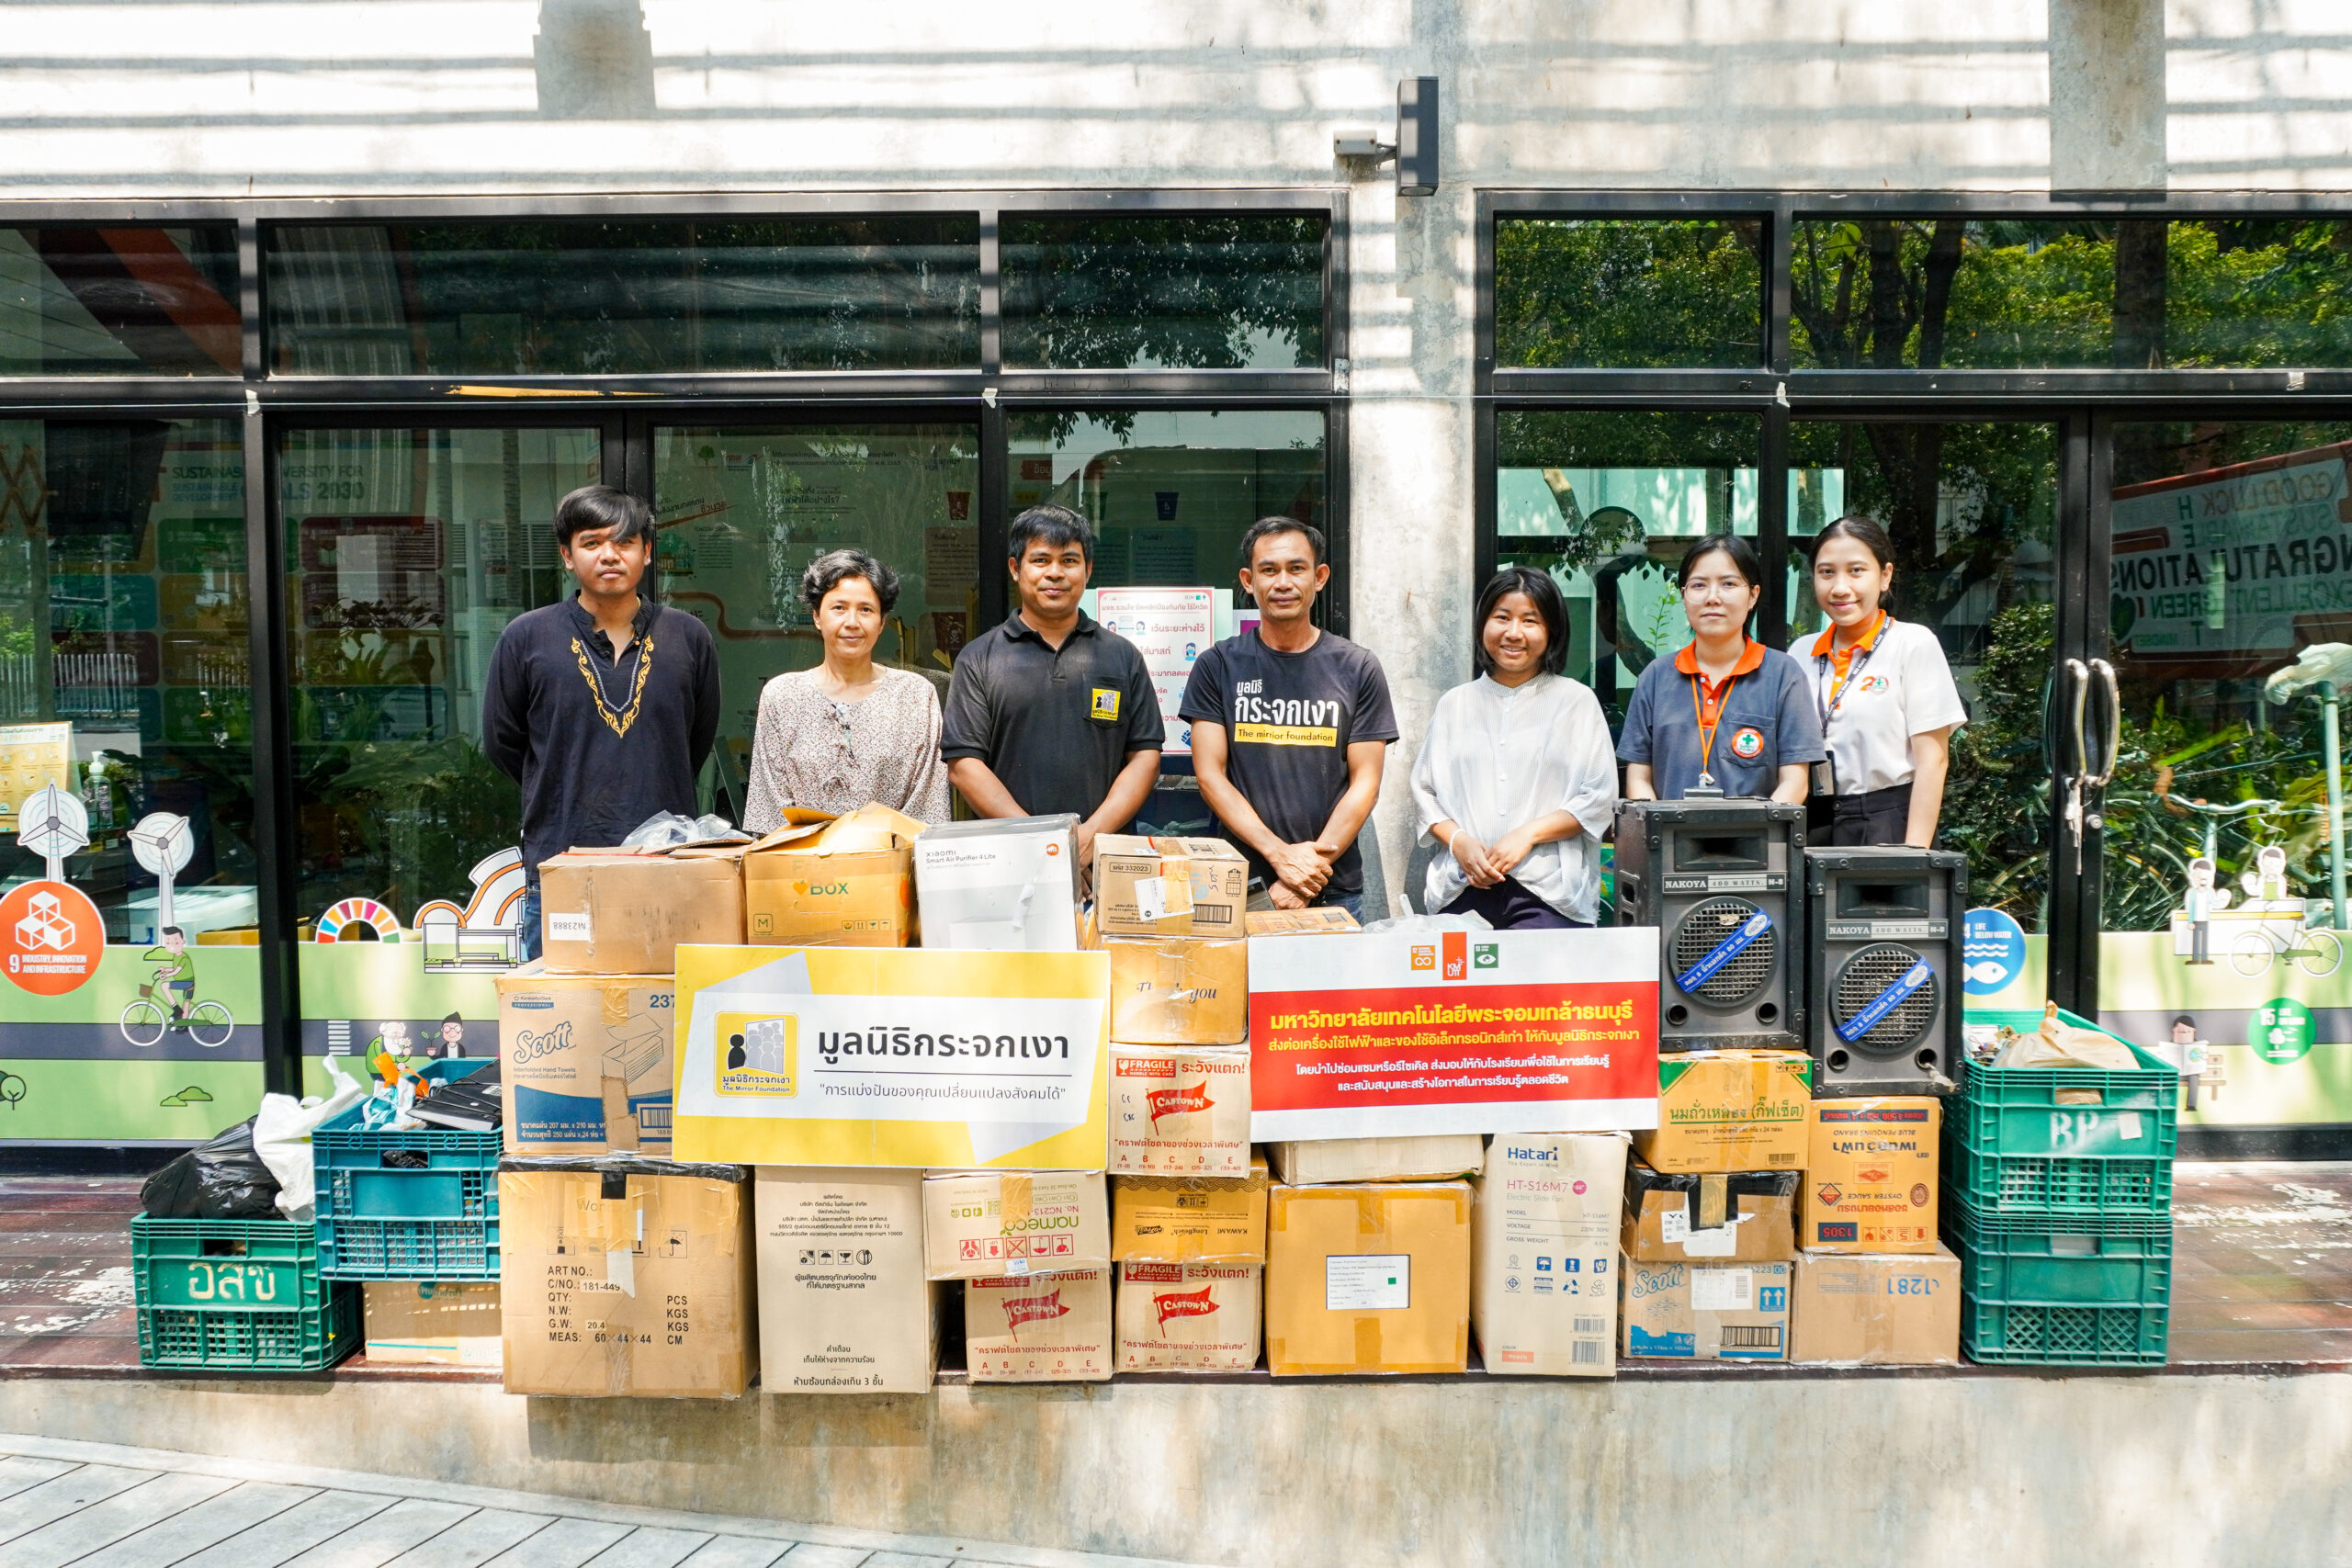 KMUTT Donates Electrical Appliances and Electronics to Mirror Foundation for…